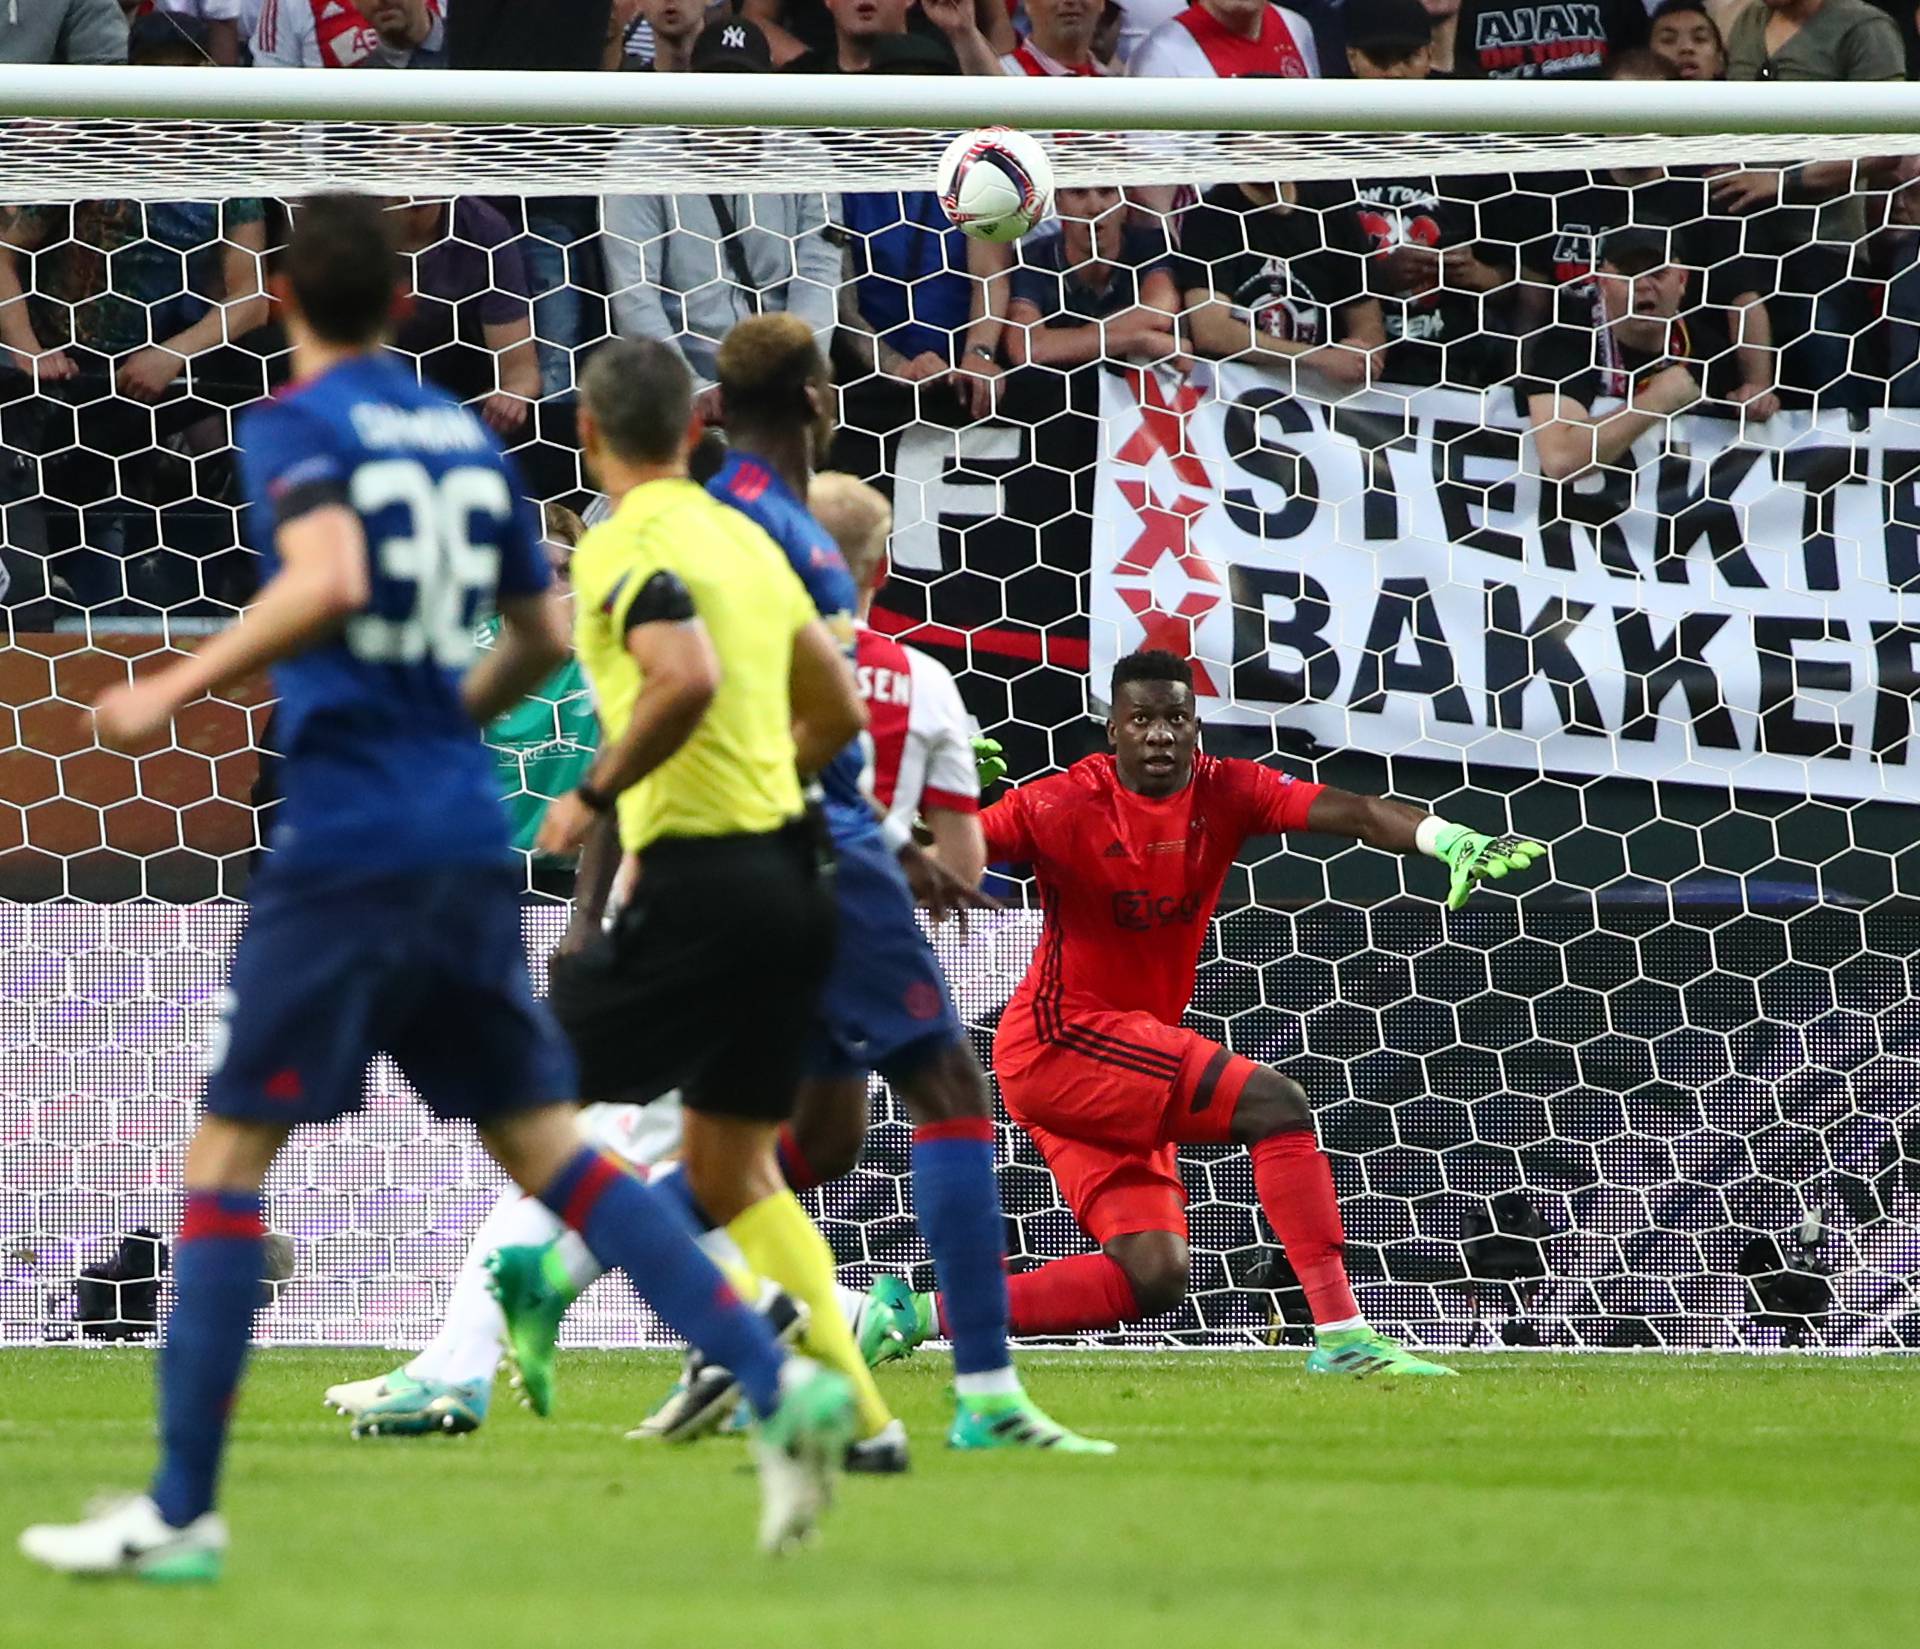 Manchester United's Paul Pogba scores their first goal past Ajax's Andre Onana